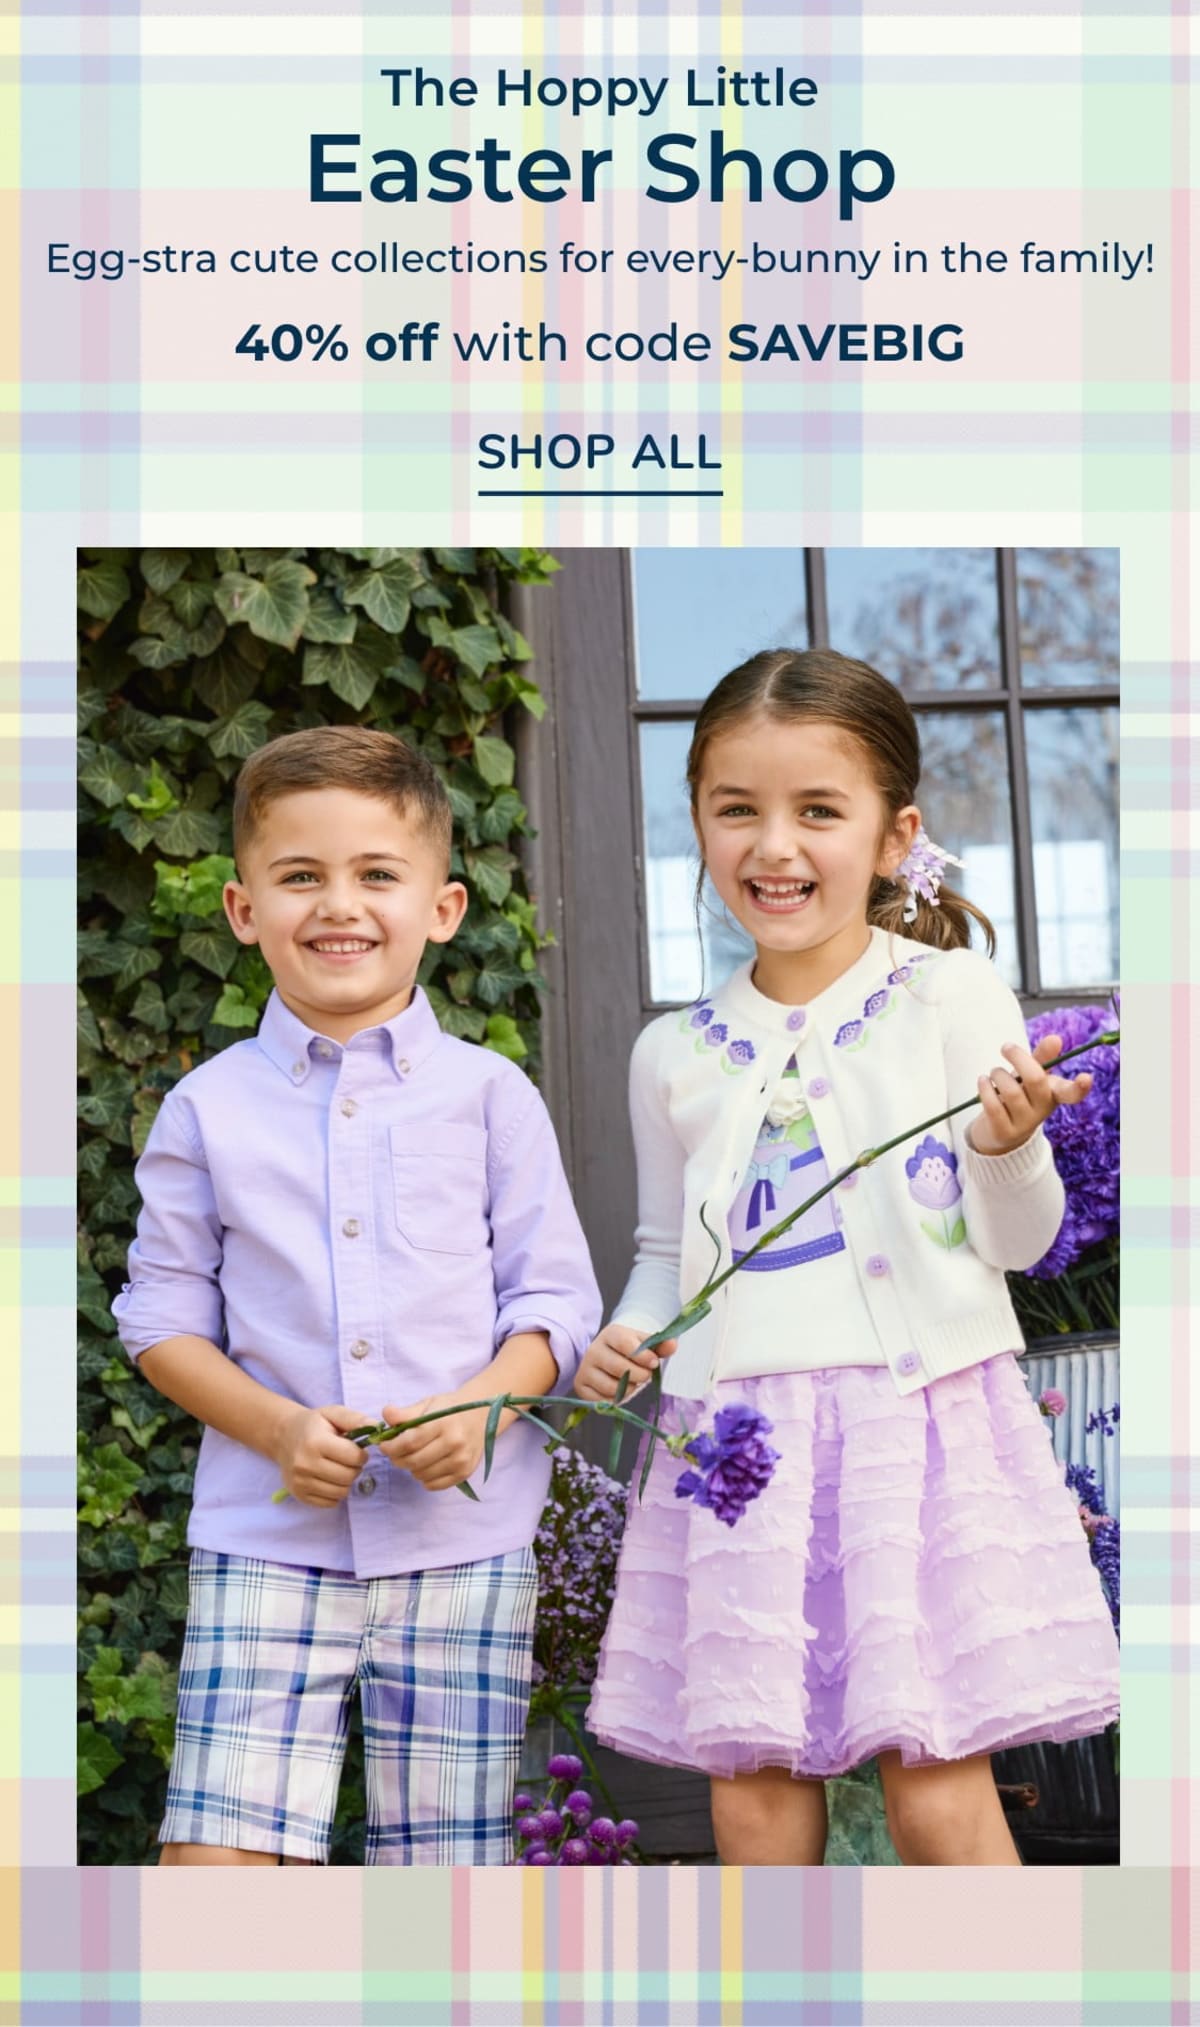 The Hoppy Little Easter Shop | Egg-stra cute collections for every-bunny in the family! 40% off with code SAVEBIG